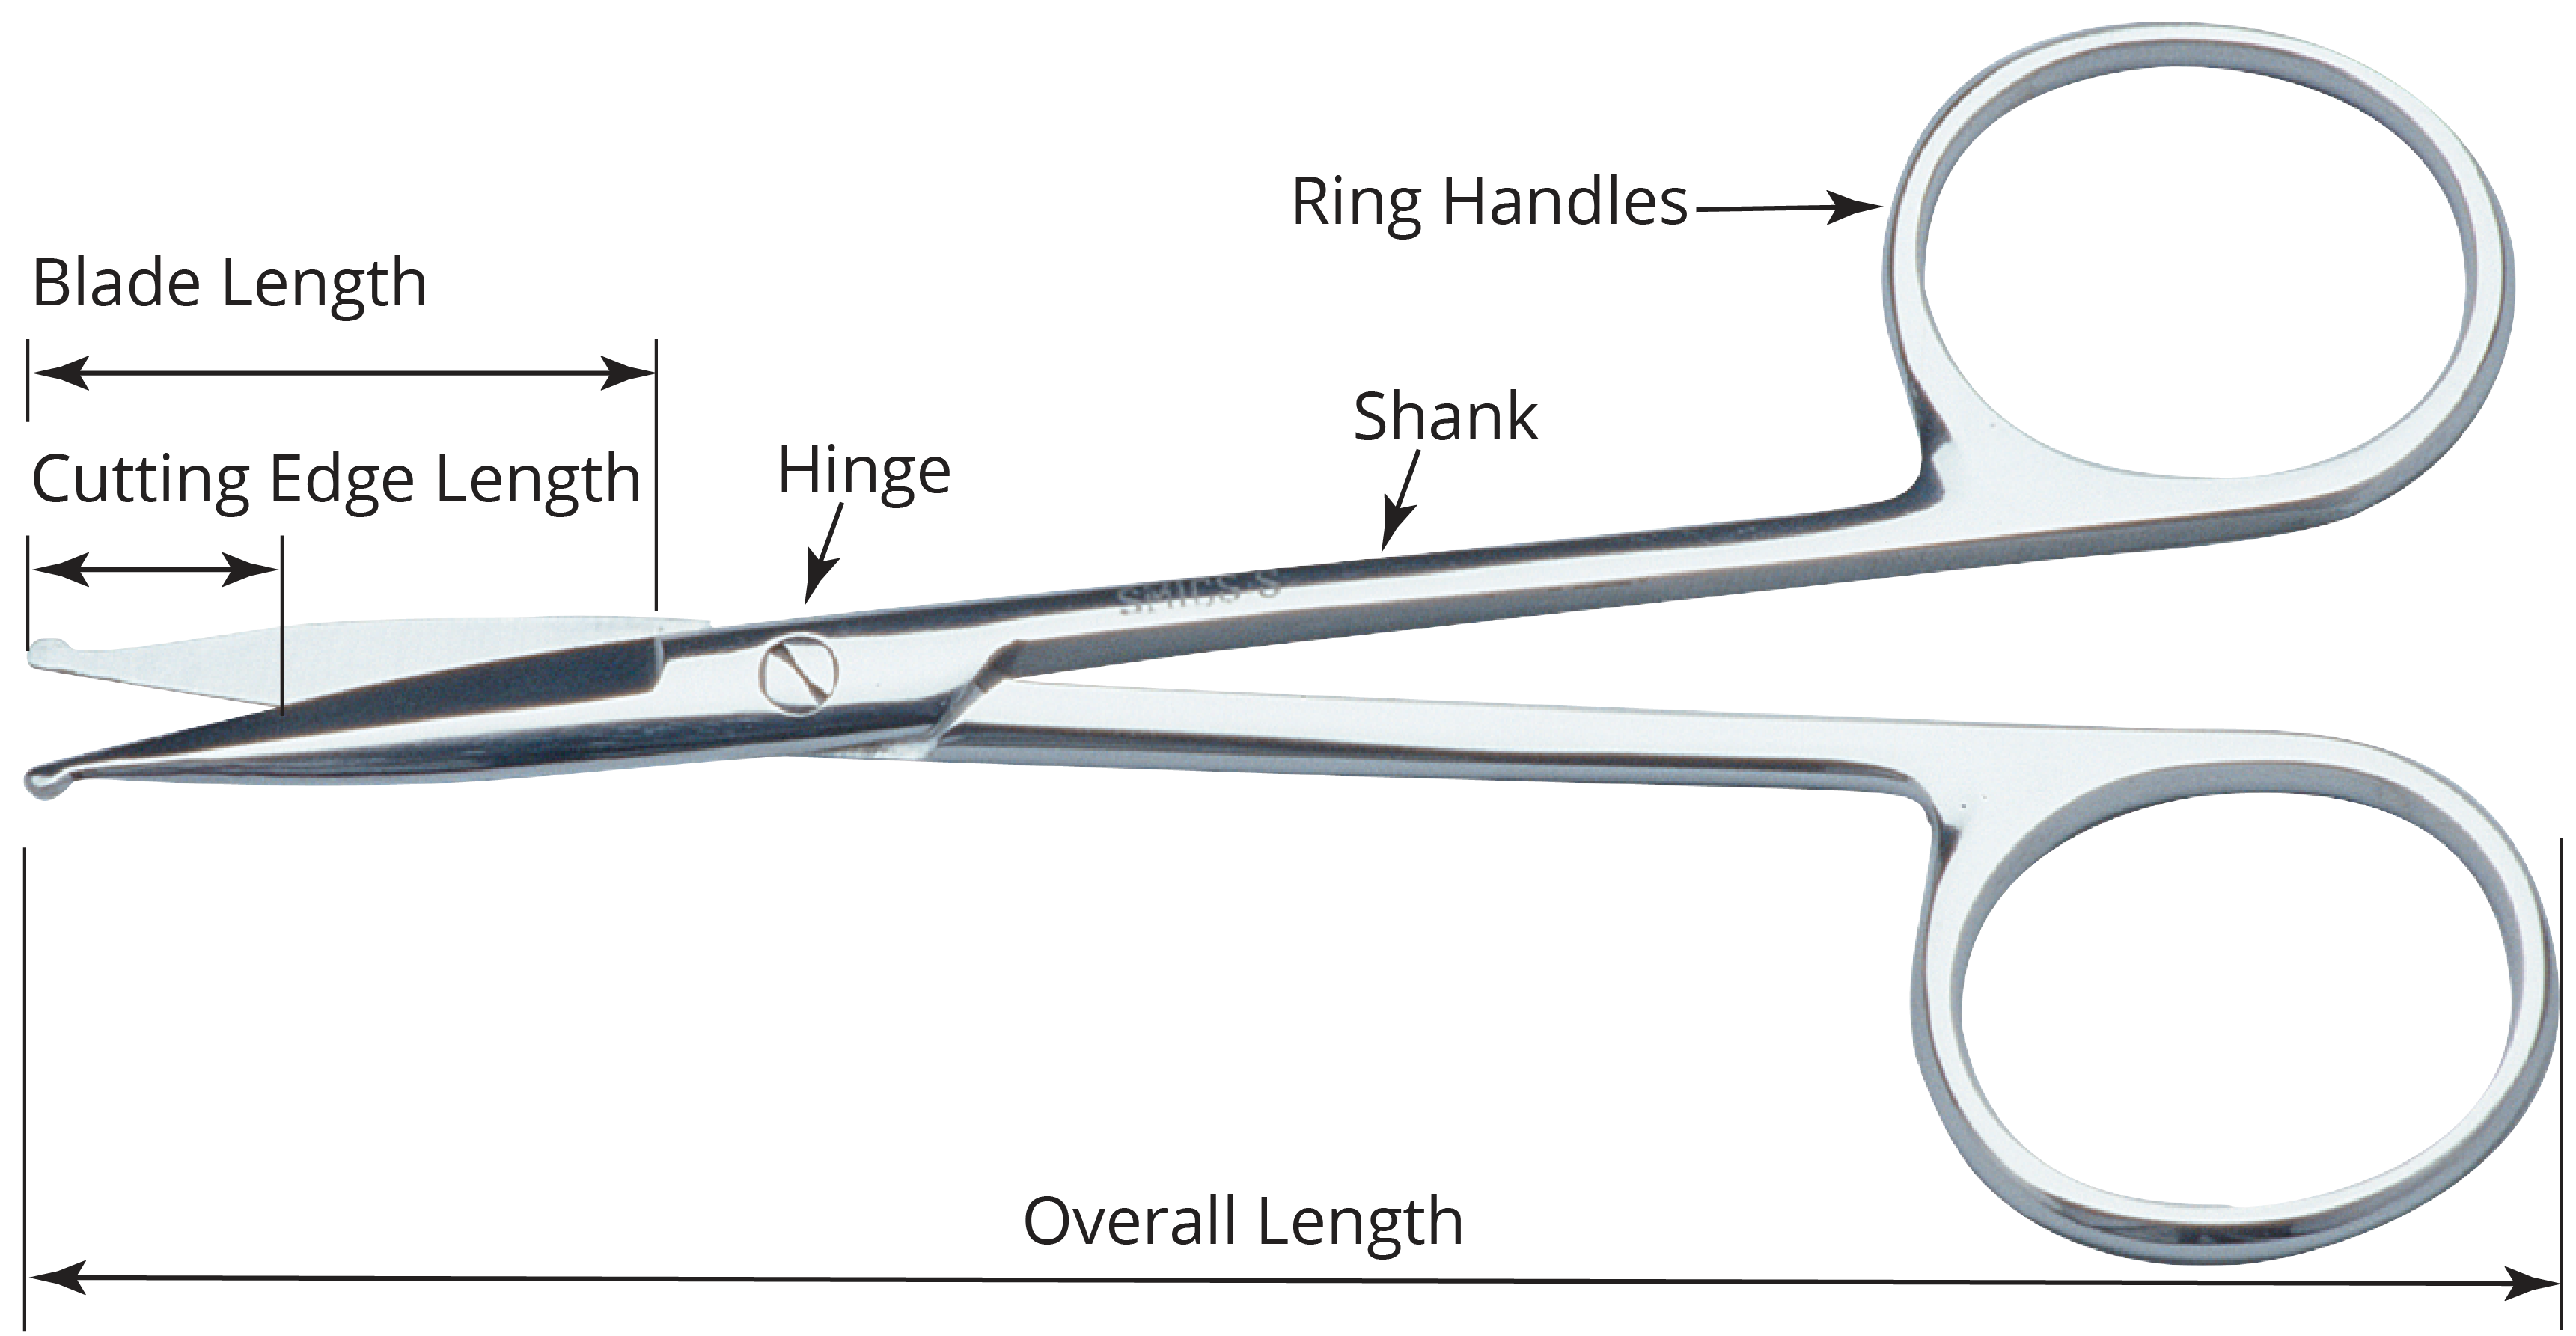 Check this out:All-Purpose Scissors